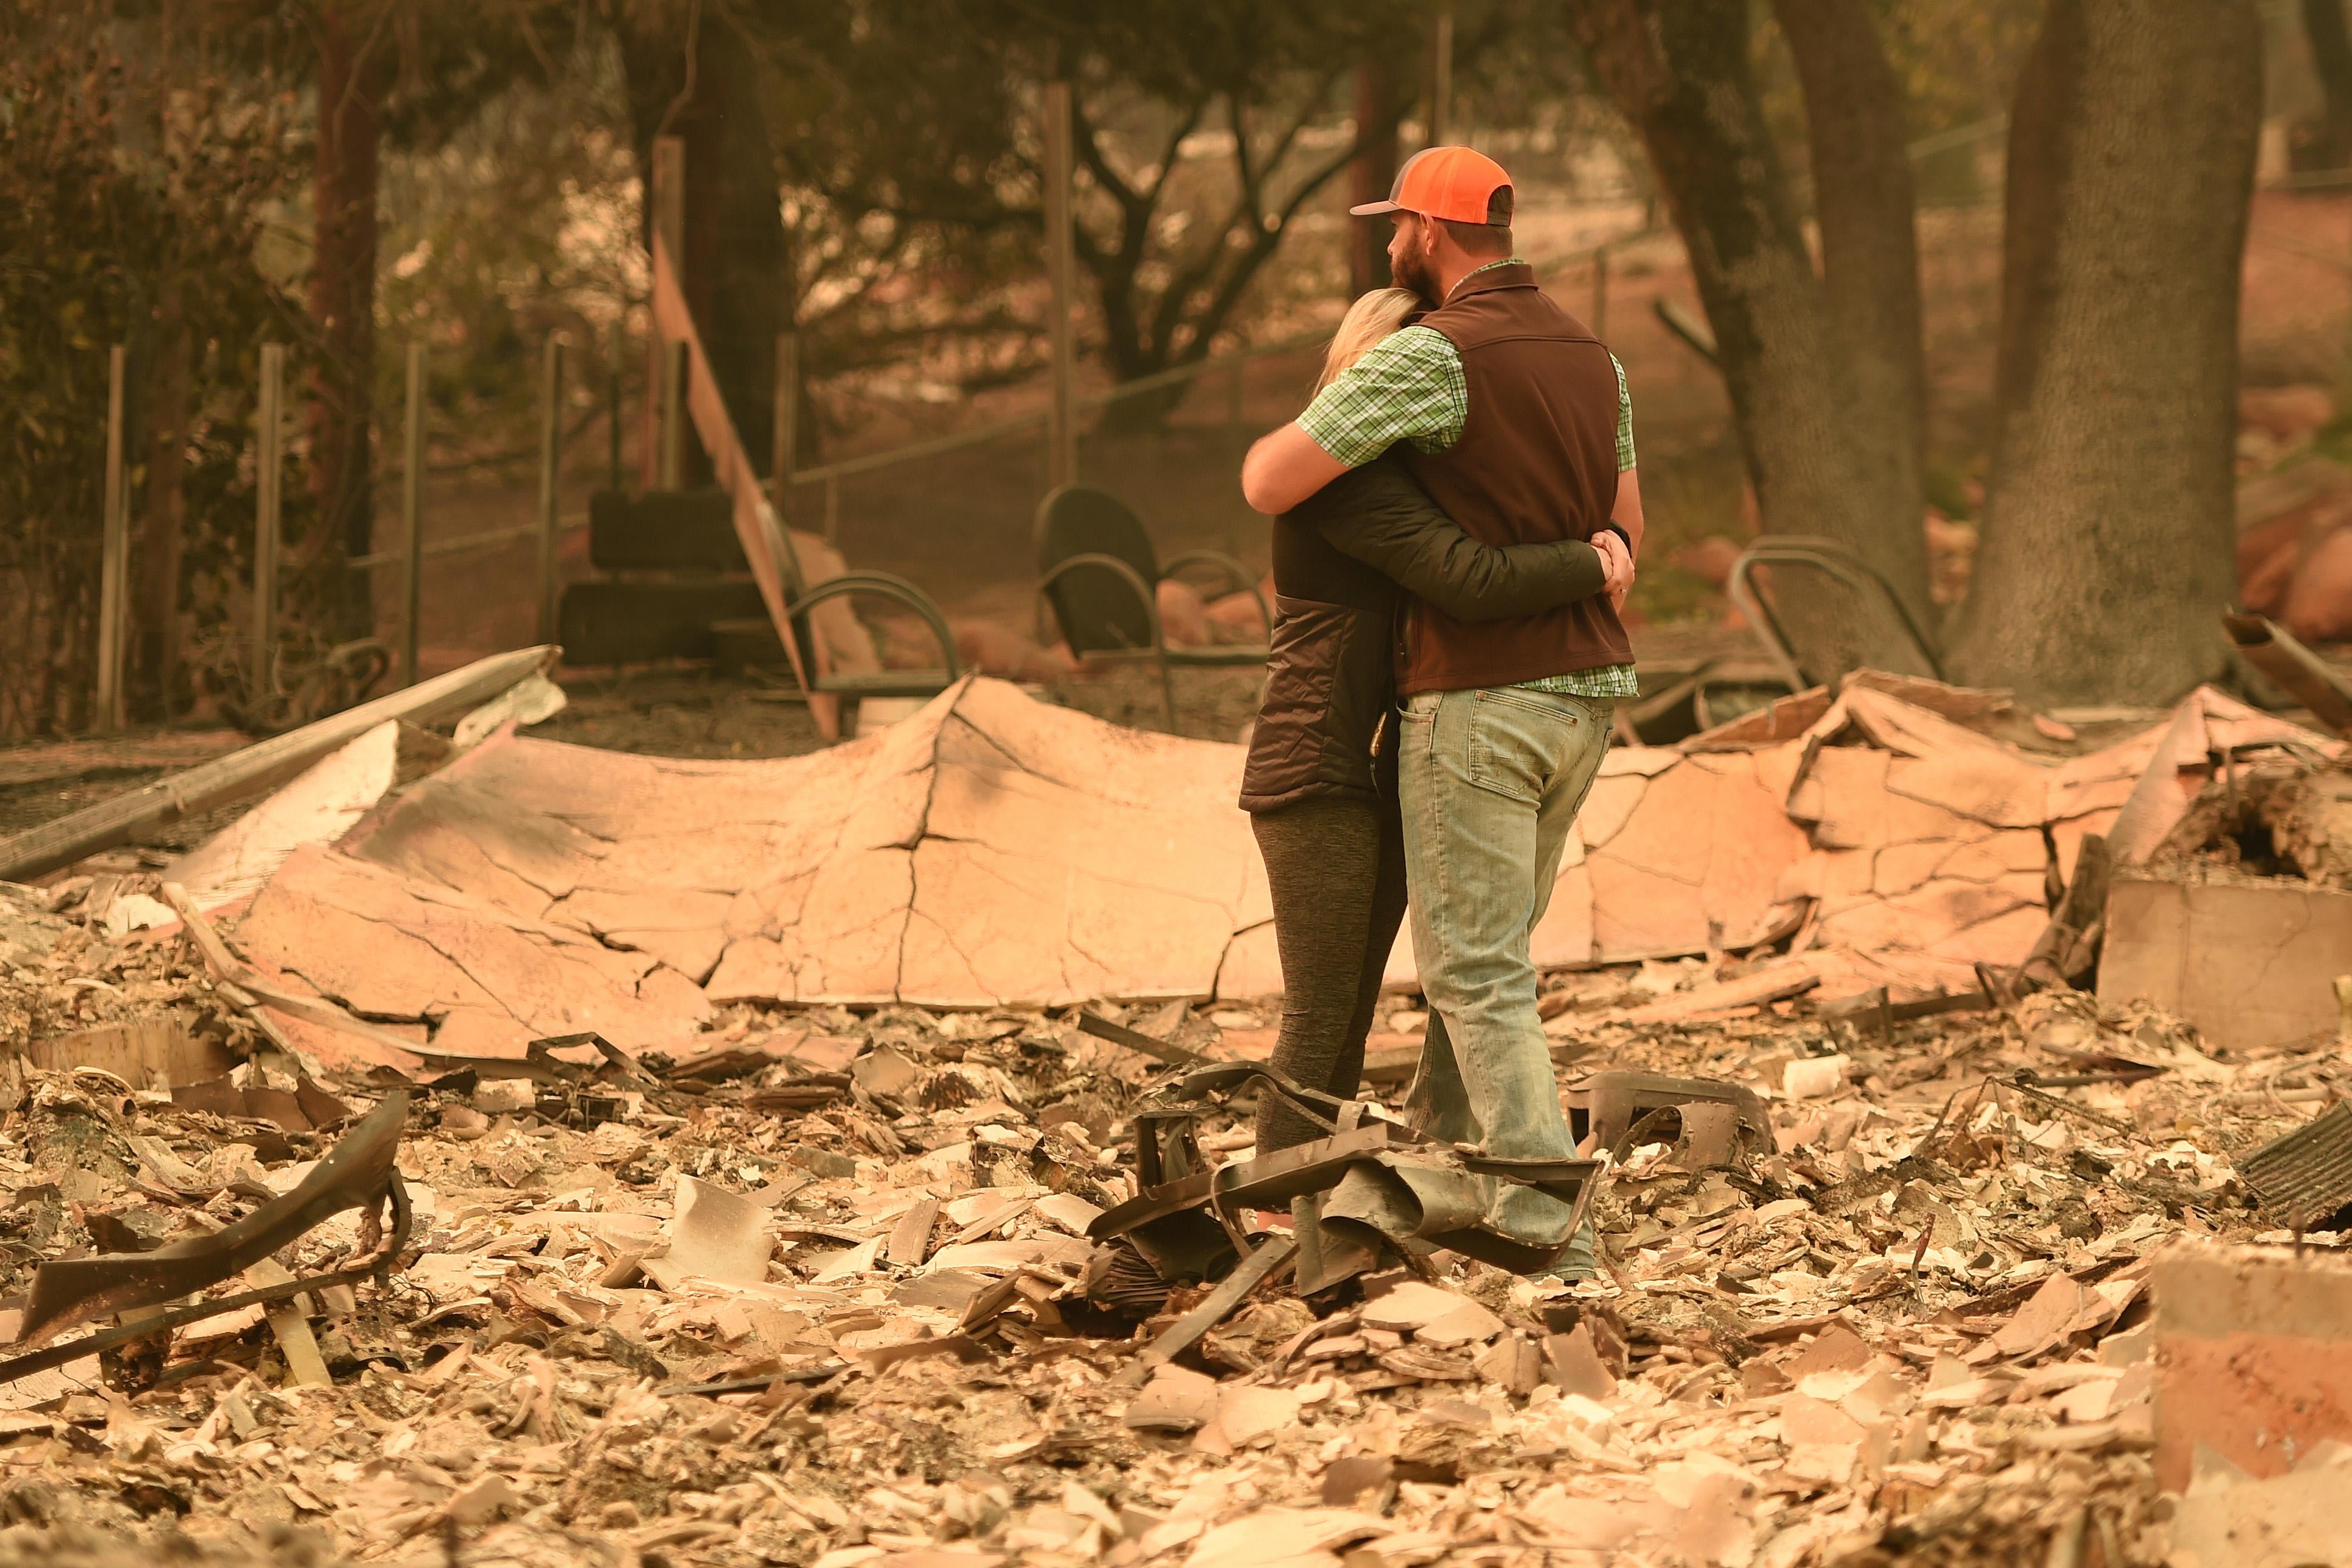 A couple embrace in the middle of the rubble of their home.